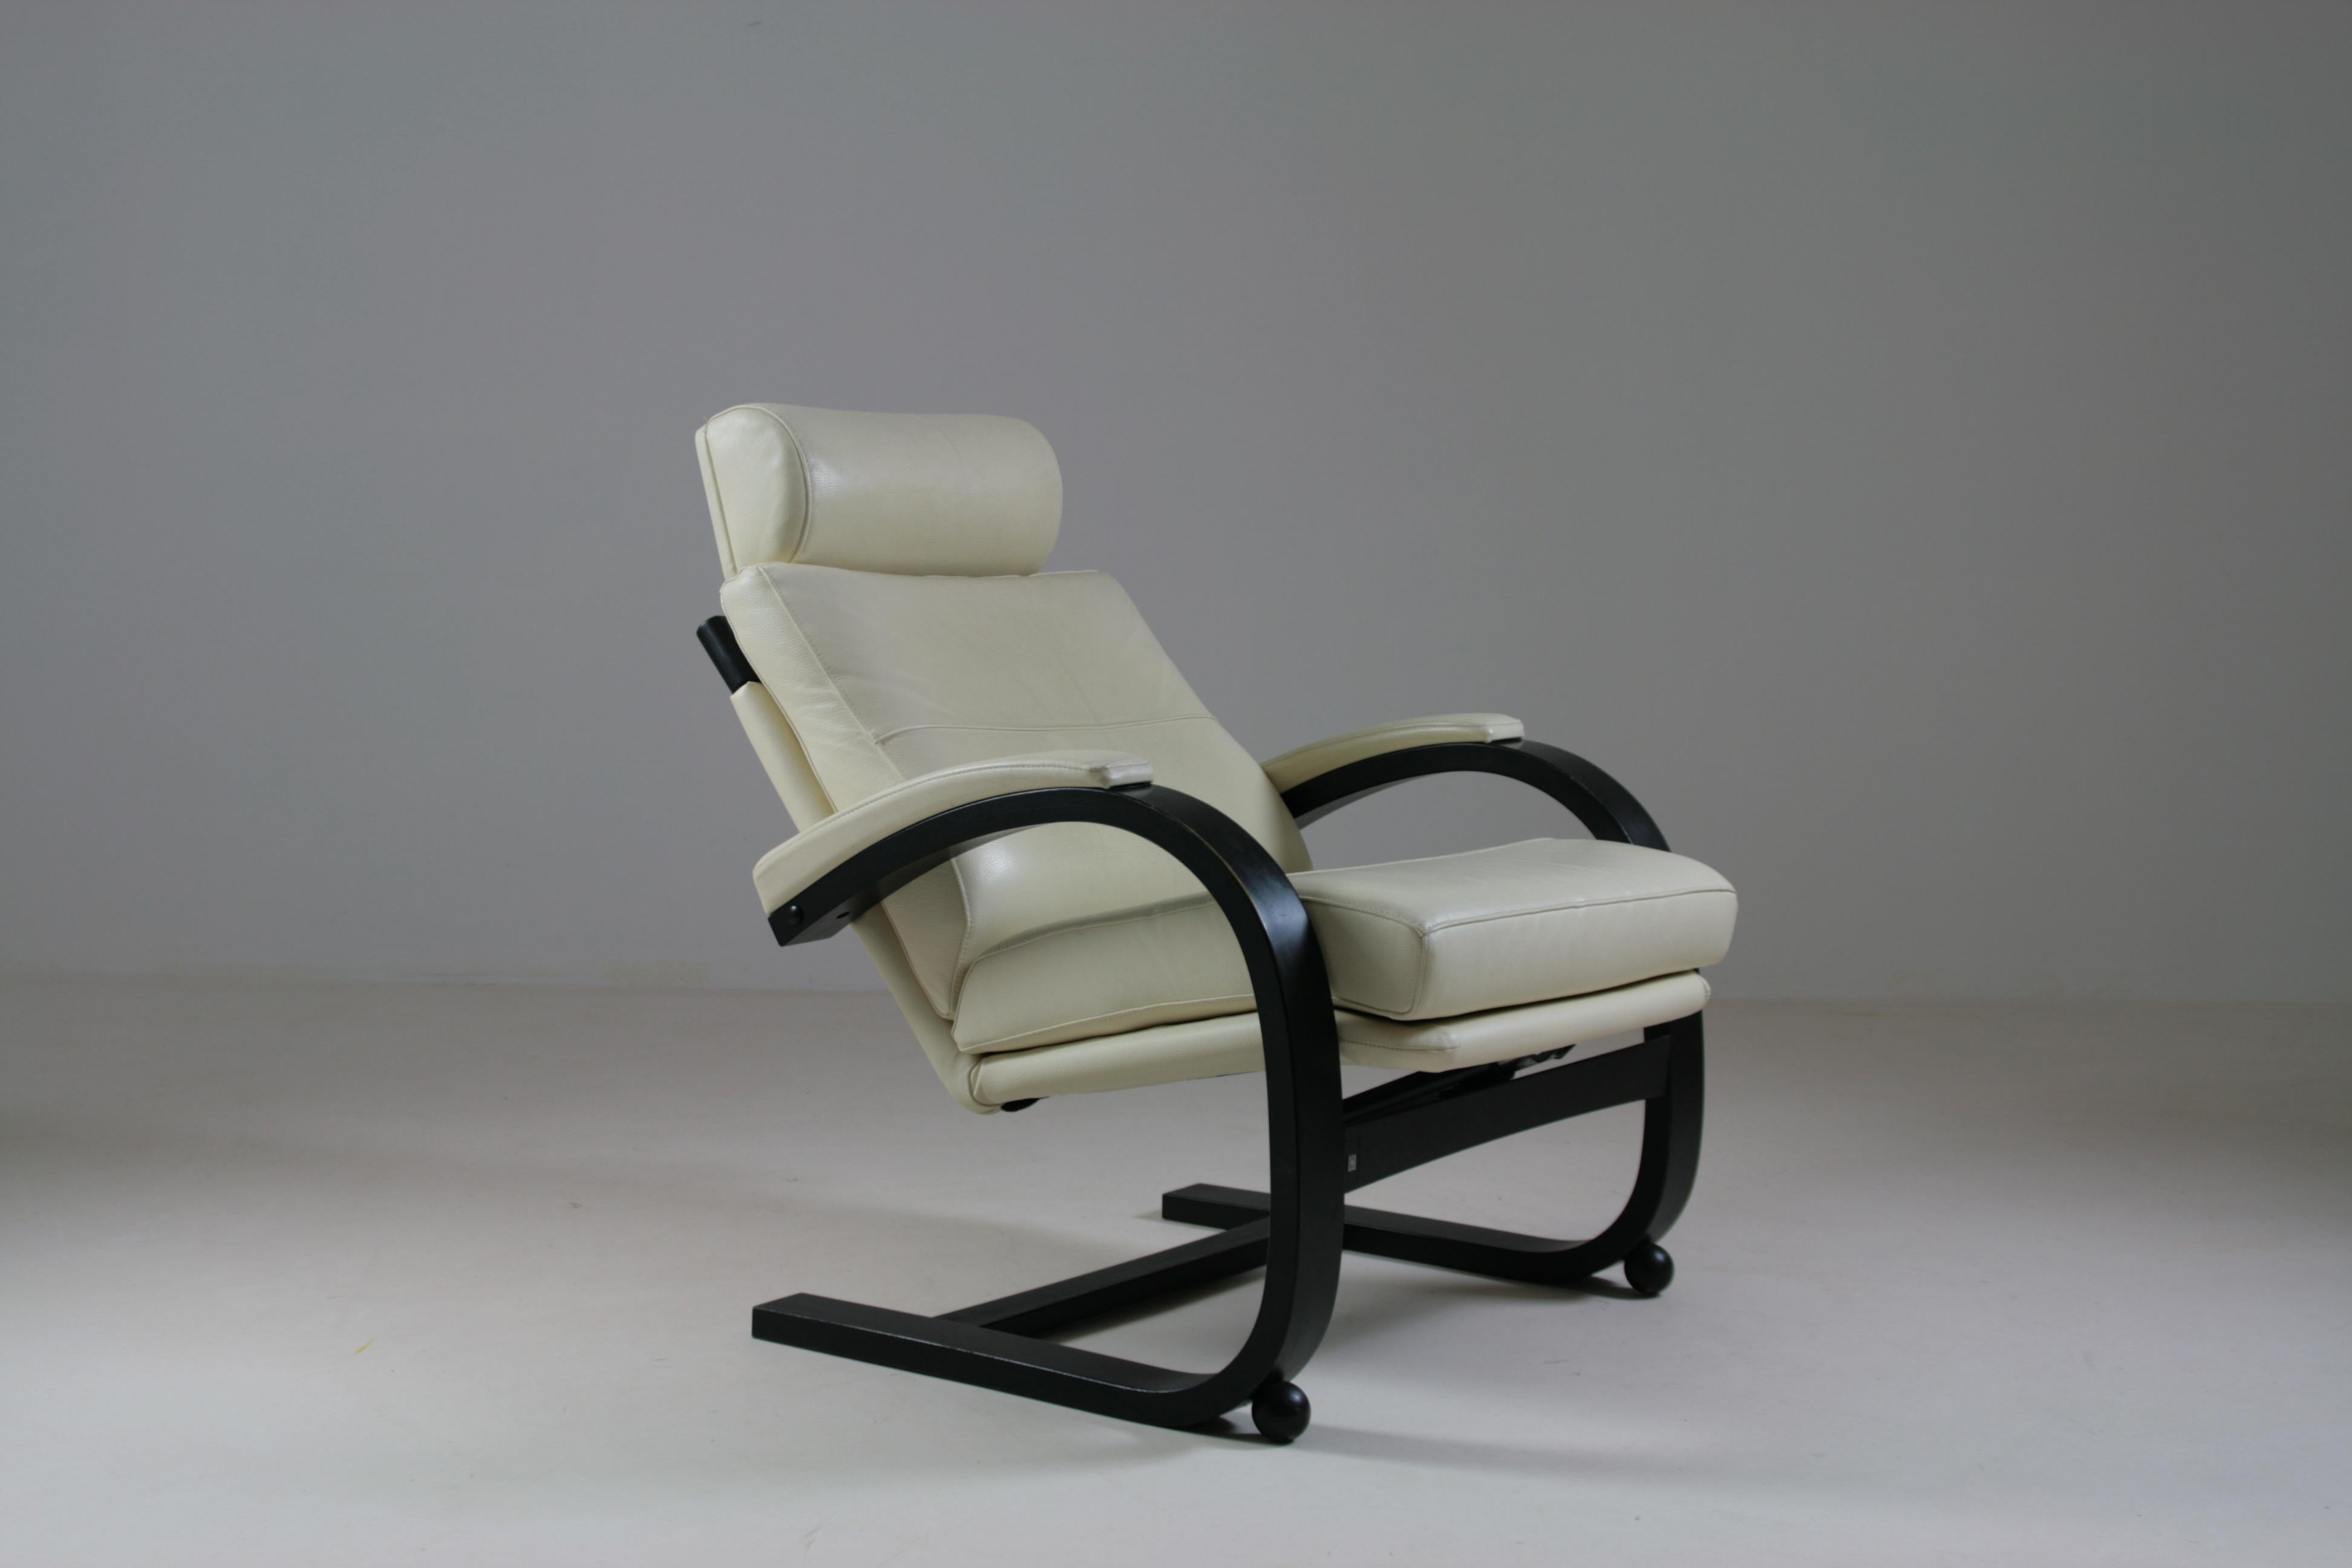 Nelo Swedish leather recliner armchair by åke fribyter For Sale 4